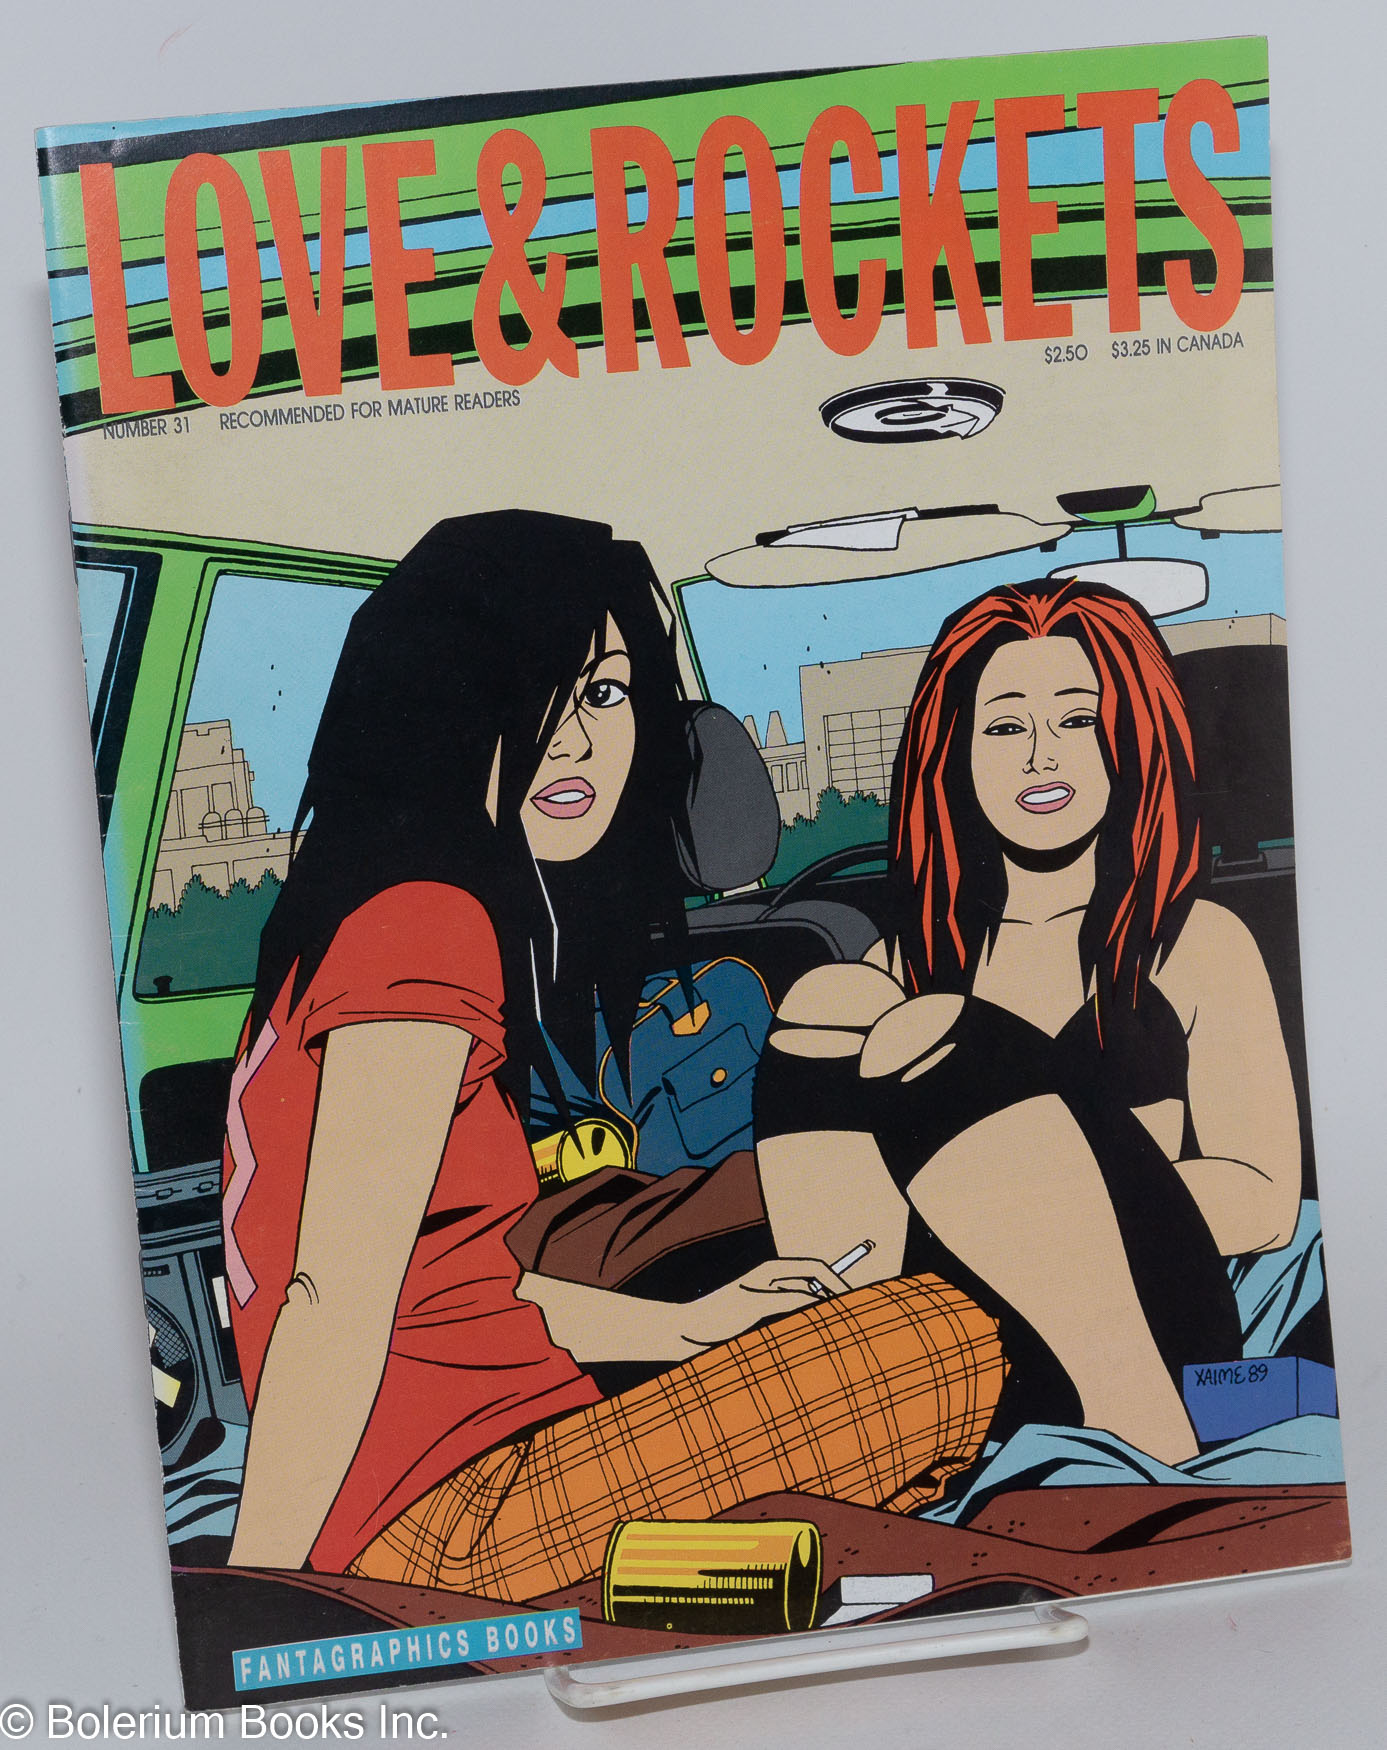 Love and Rockets - Love and Rockets Vol.9 Comic book sc by Jaime